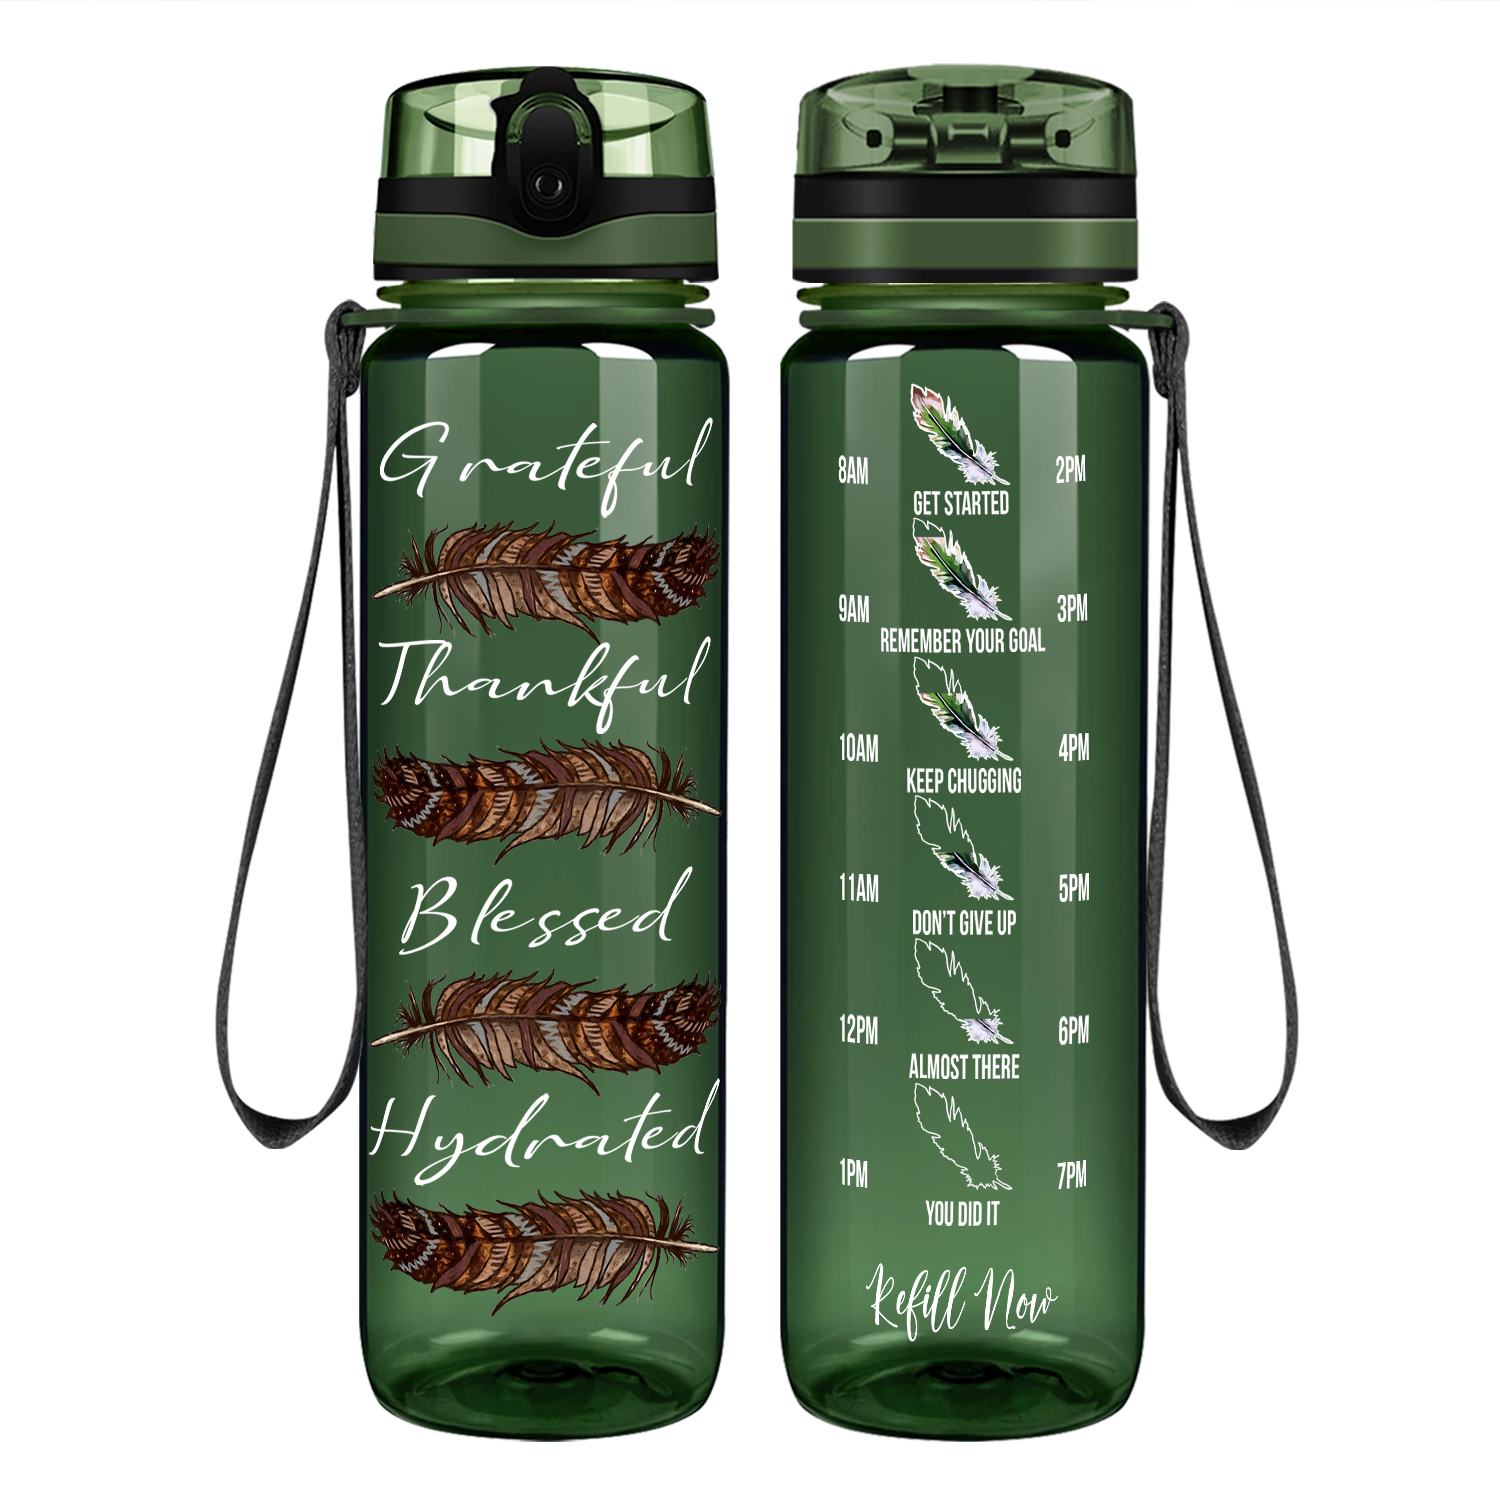 Grateful Thankful Blessed Hydrated with Feathers Motivational Tracking Water Bottle